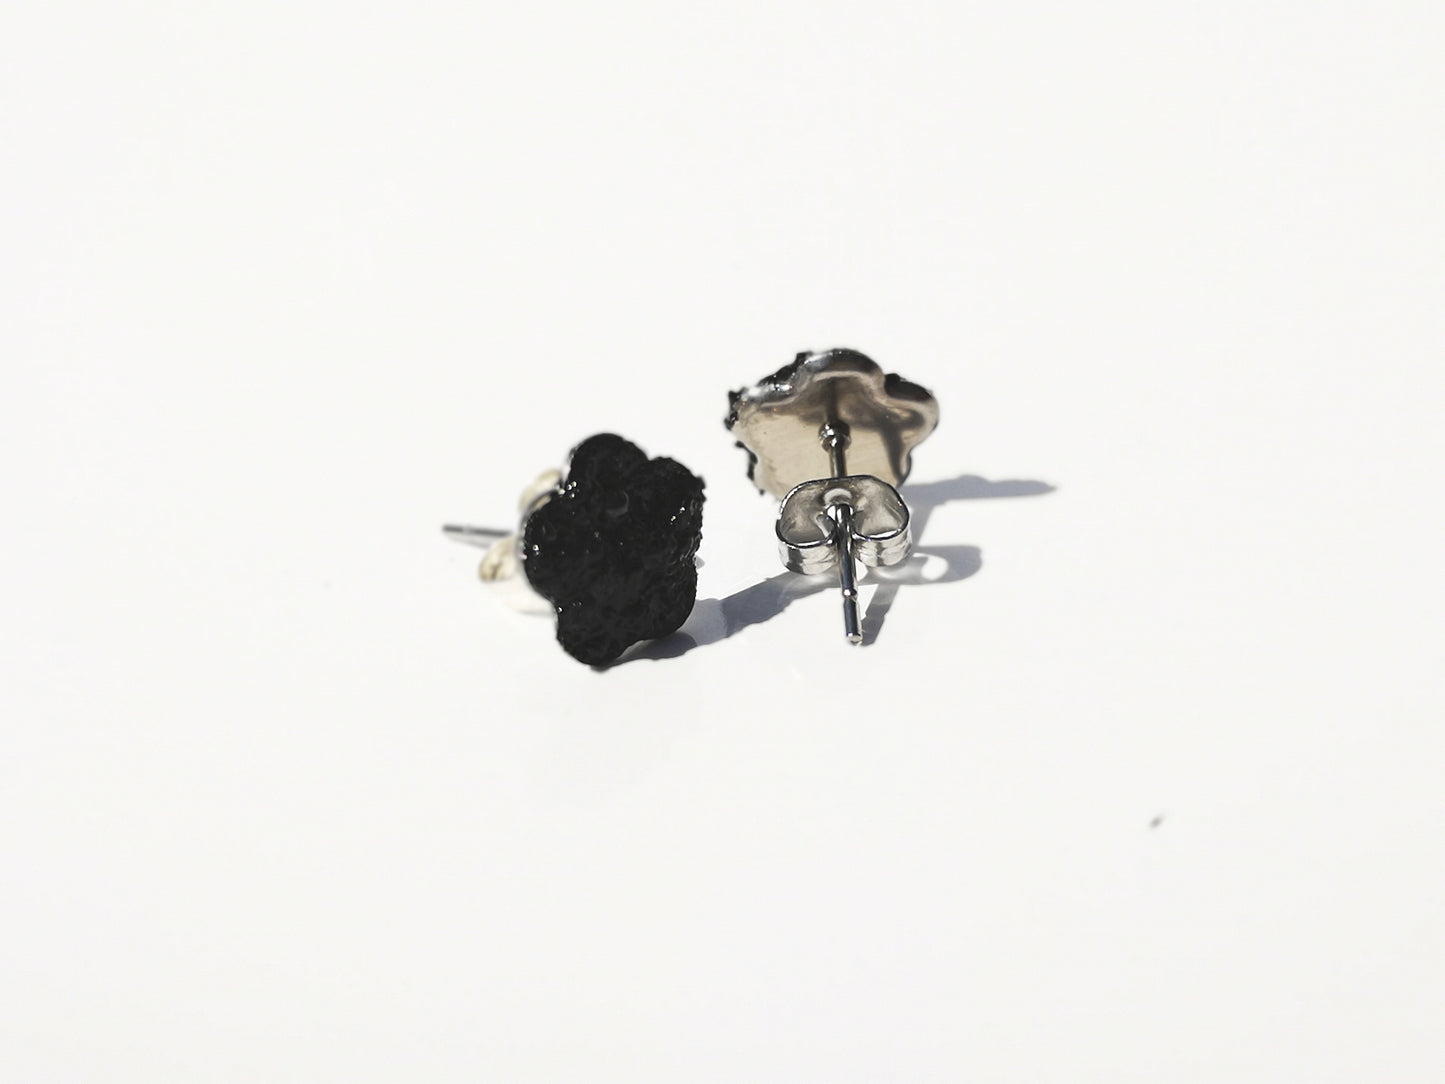 Simple and sweet small earrings Flower are perfect for spring days. Made of stainless Steel and coal. Perfect gift for girls and ladies. Handmade coal jewelry Marjeta Hribar. Kuolmi.com